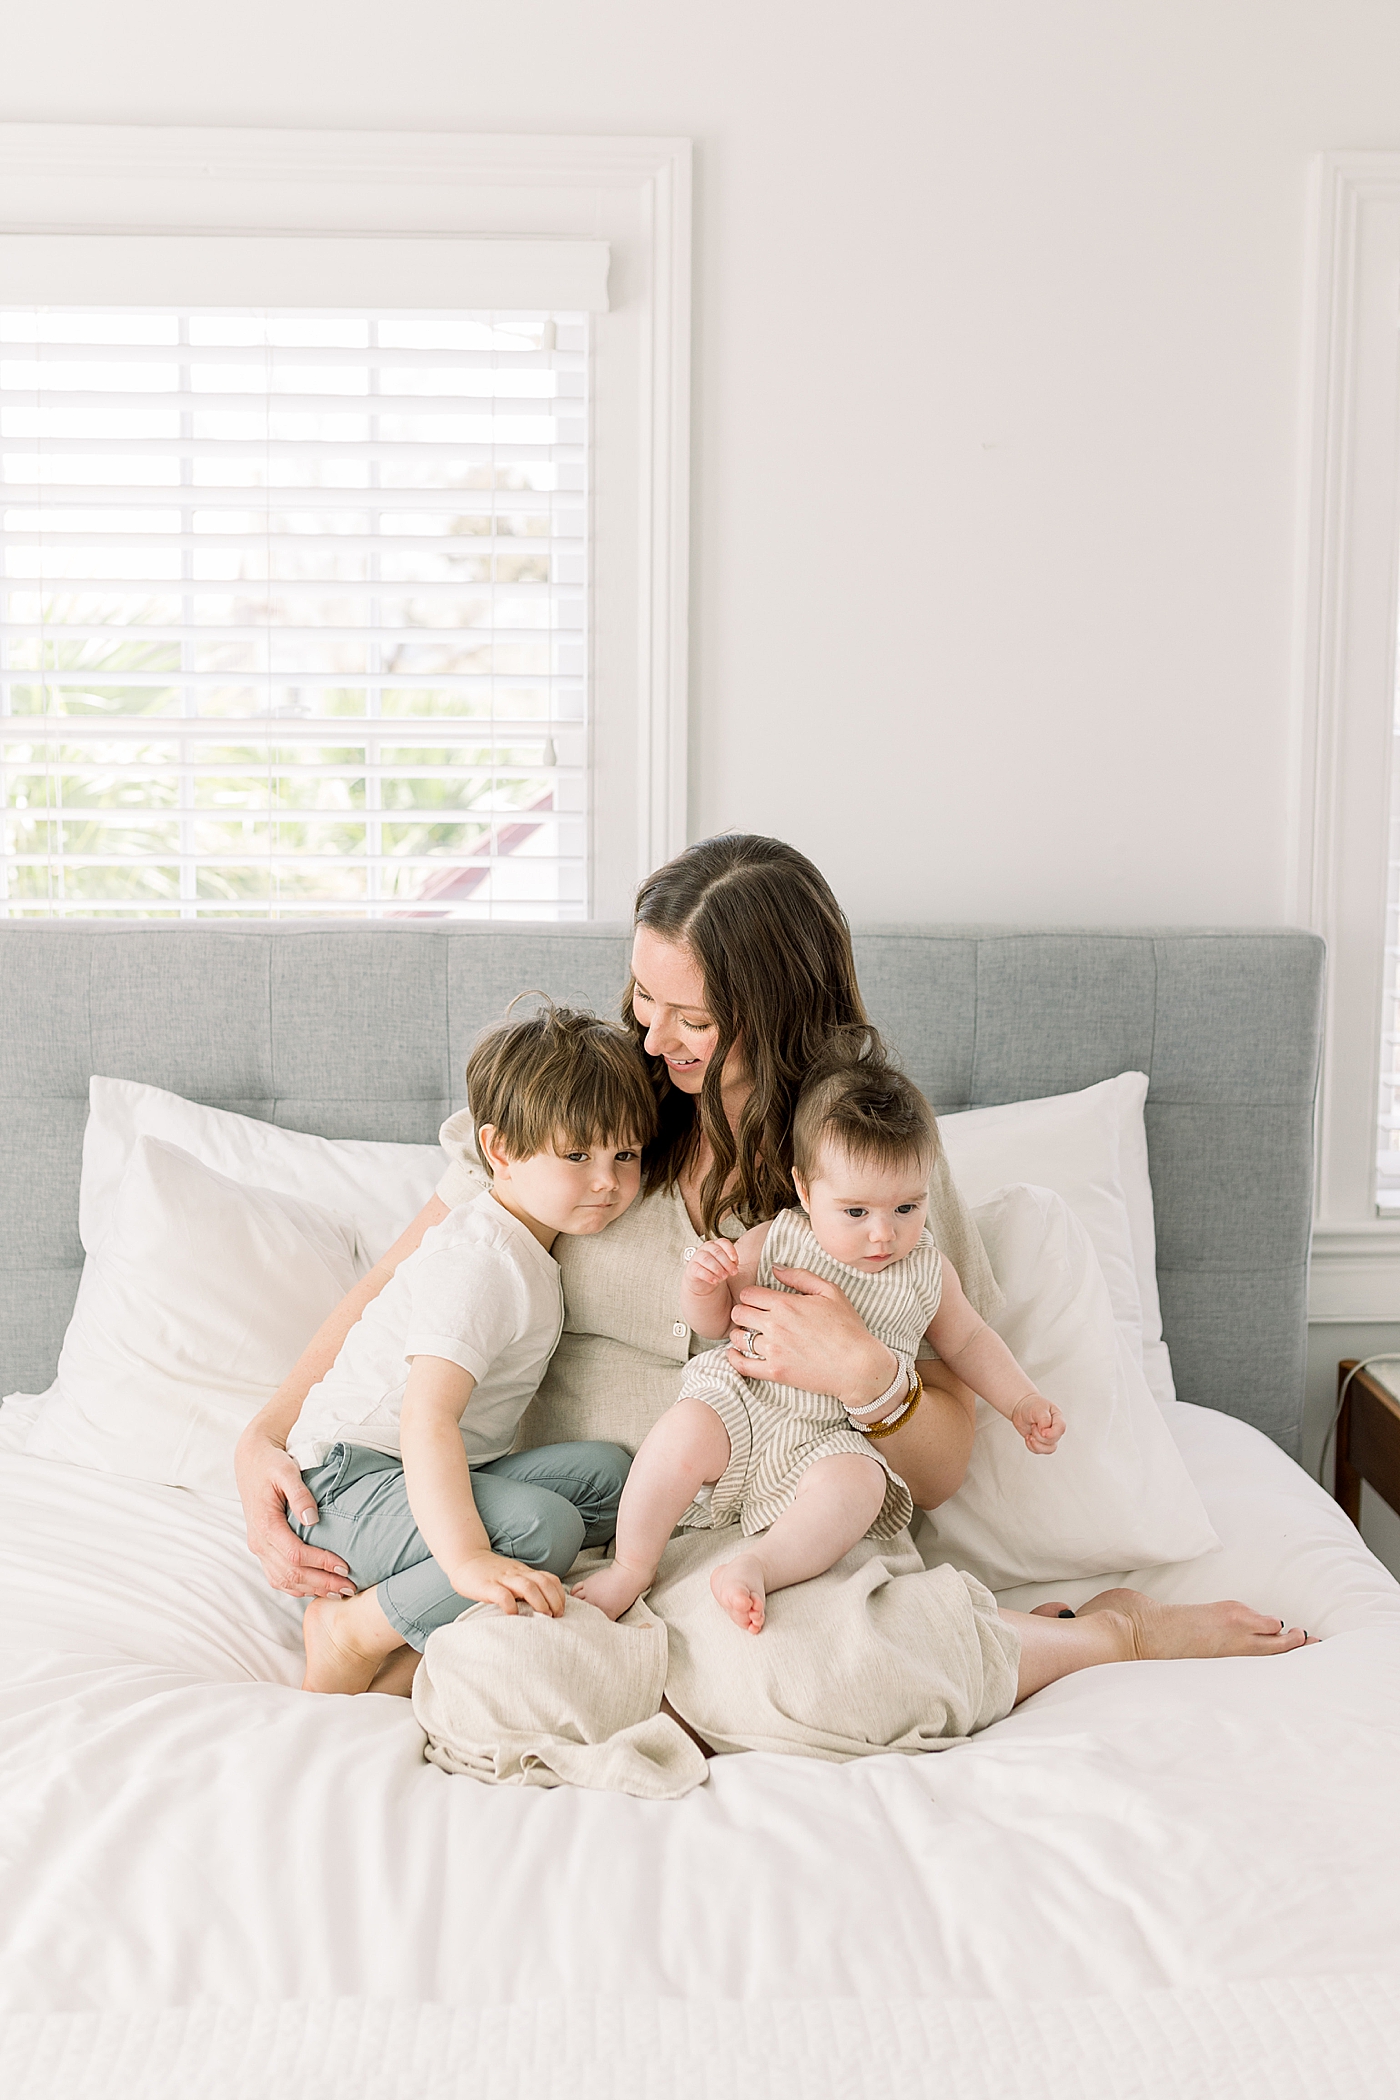 Mom sitting on a bed with her two babies | Image by Caitlyn Motycka